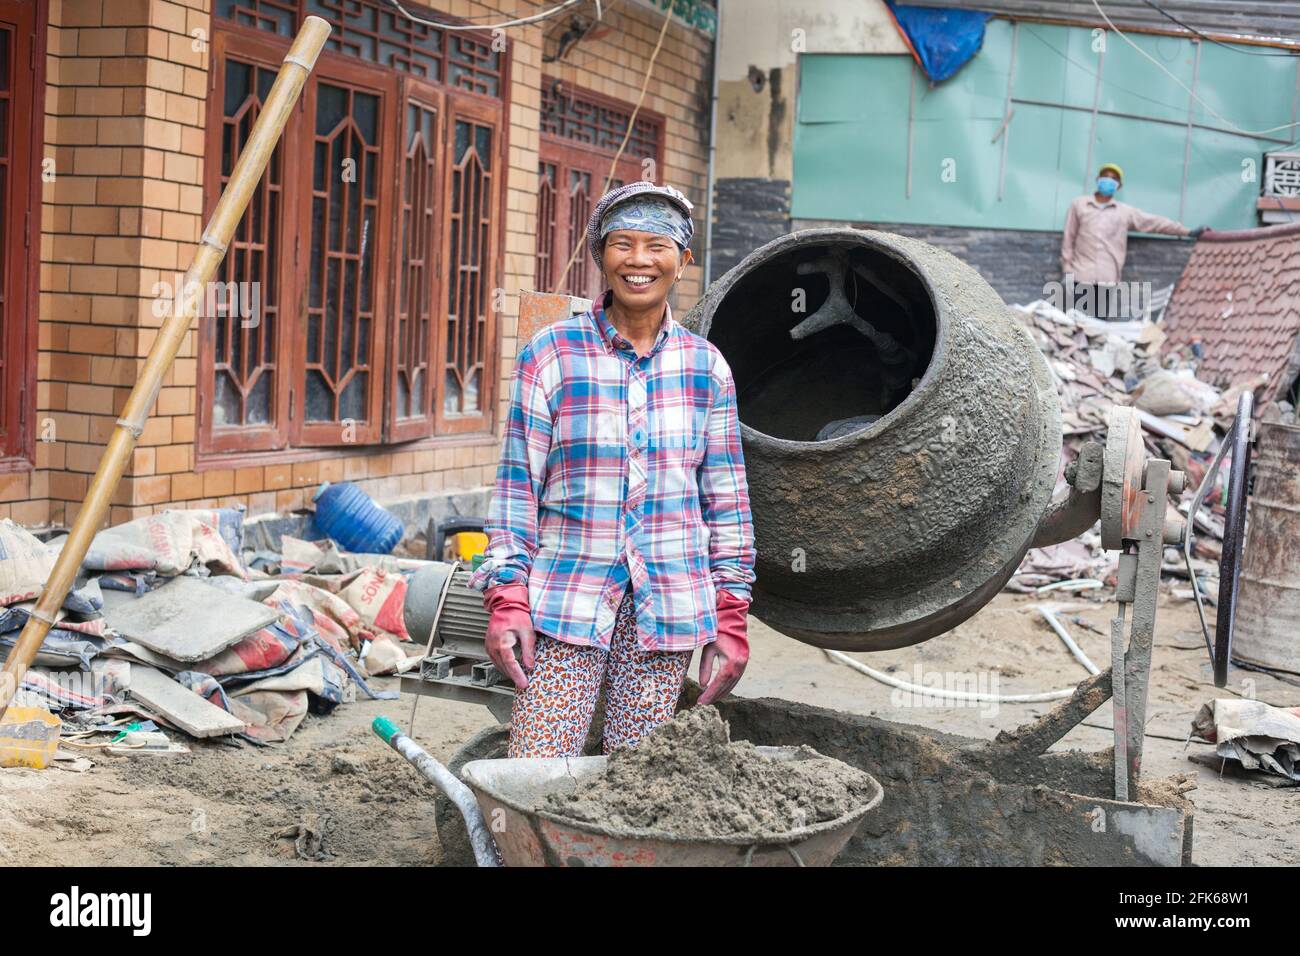 Cheerful Vietnamese female manual labourer mixing concrete in cement mixer on building site, Hoi An, Vietnam Stock Photo